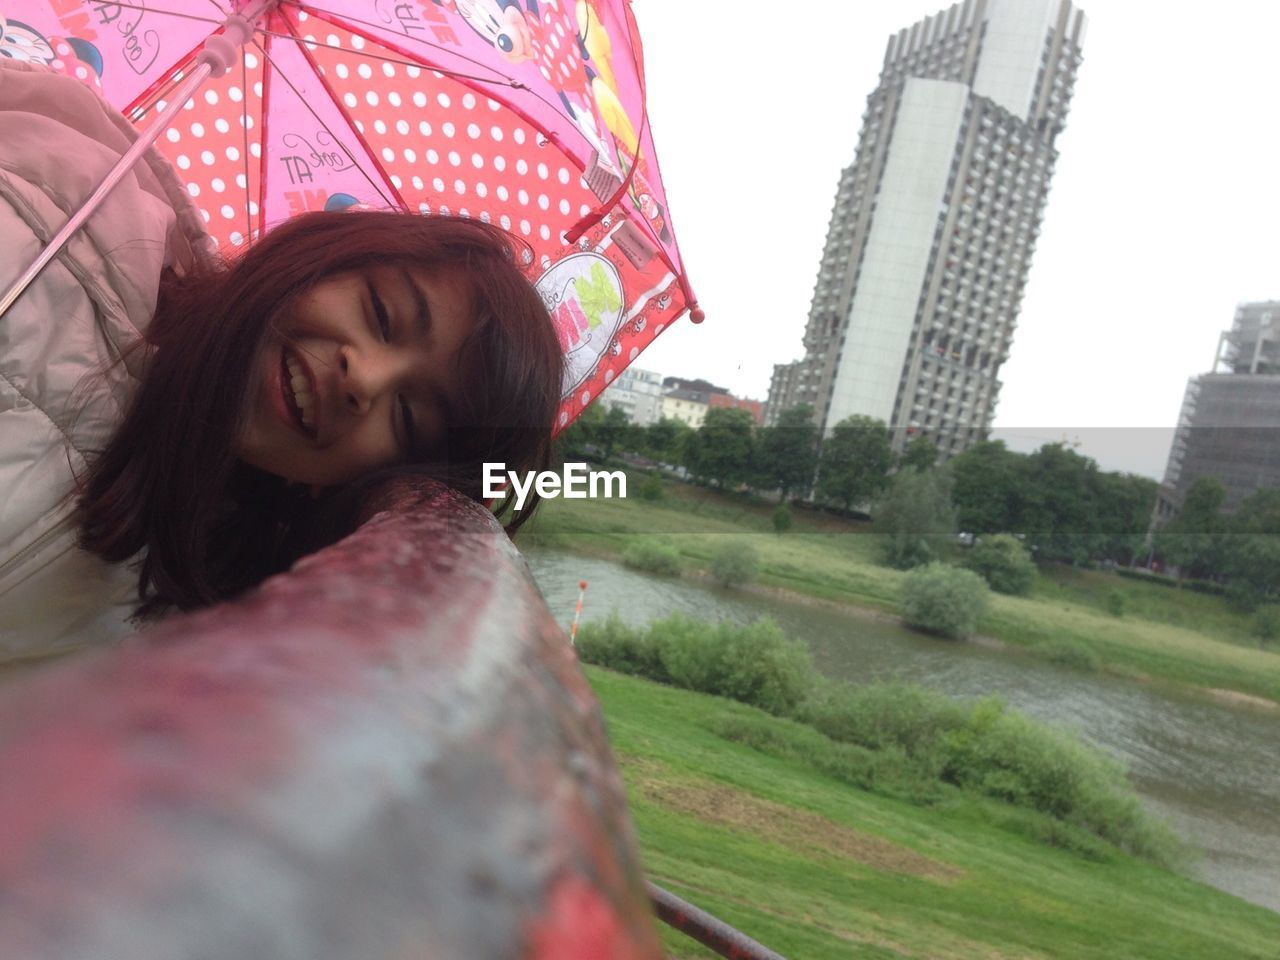 Portrait of smiling girl holding umbrella while leaning on railing during monsoon